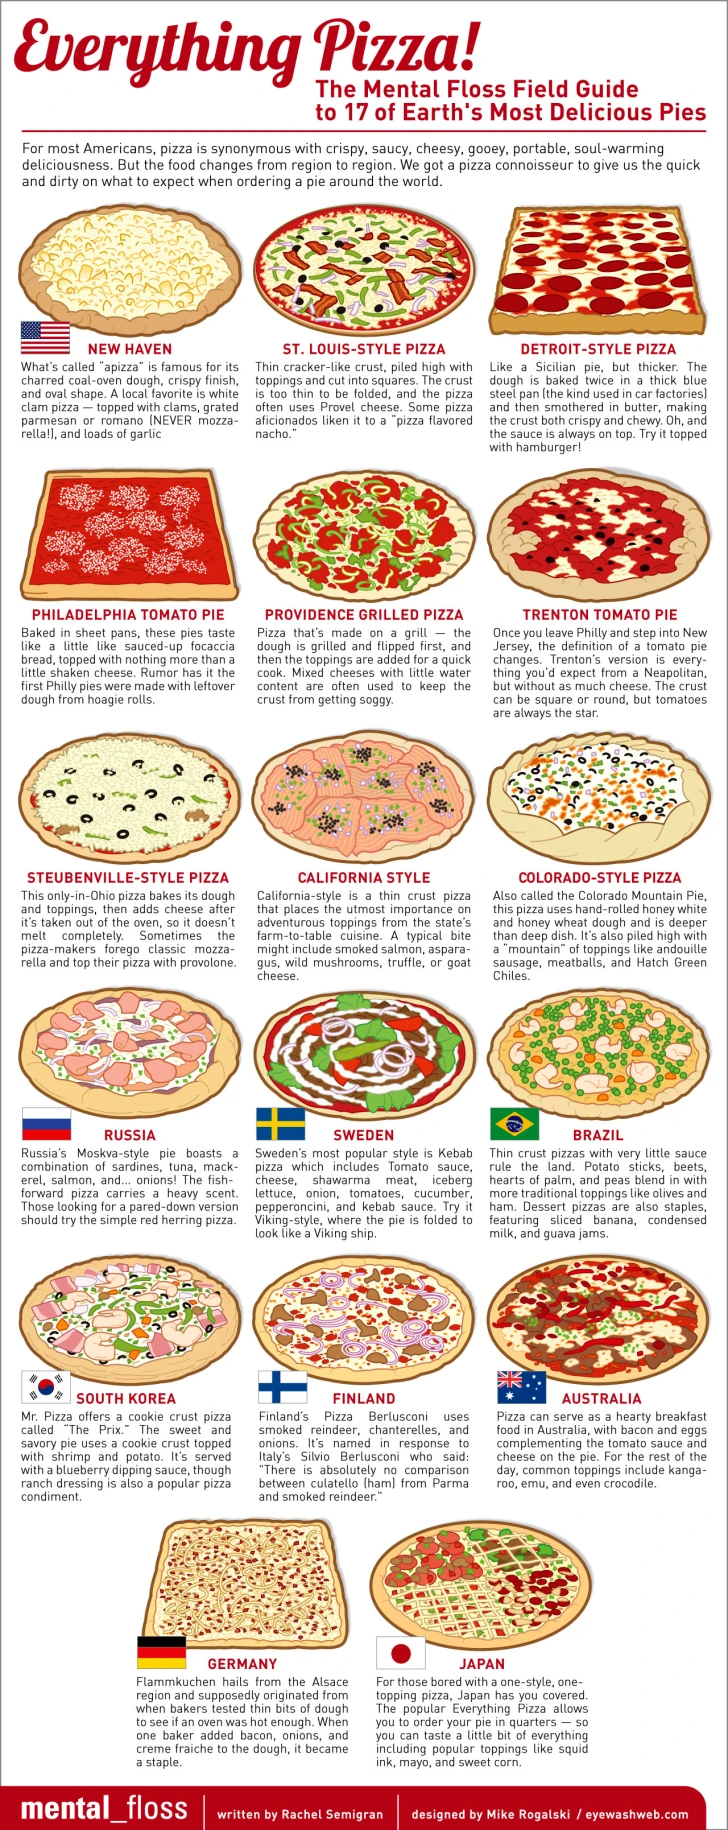 Pizzas from around the globe